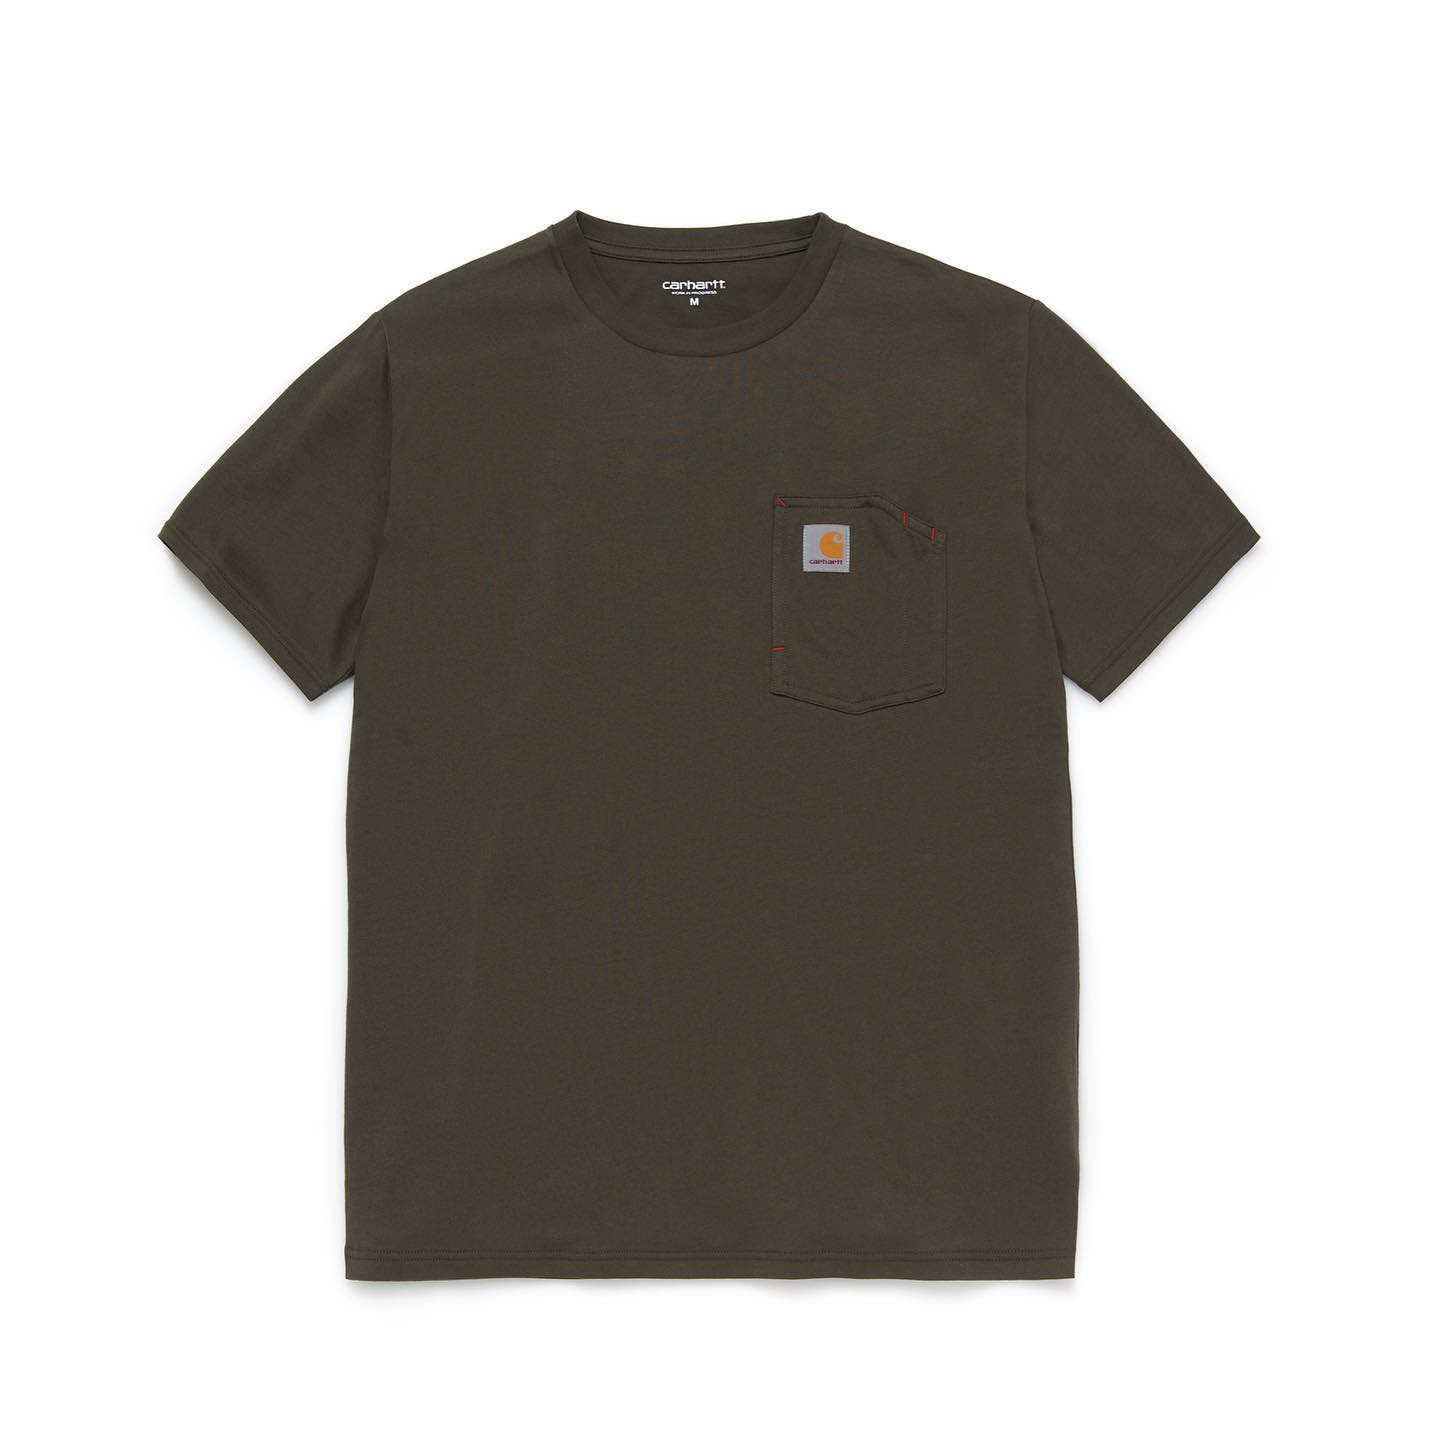 Carhartt WIP FW19 pre-launching at Carhartt WIP Pak Sha Road Store, come and check out more! 